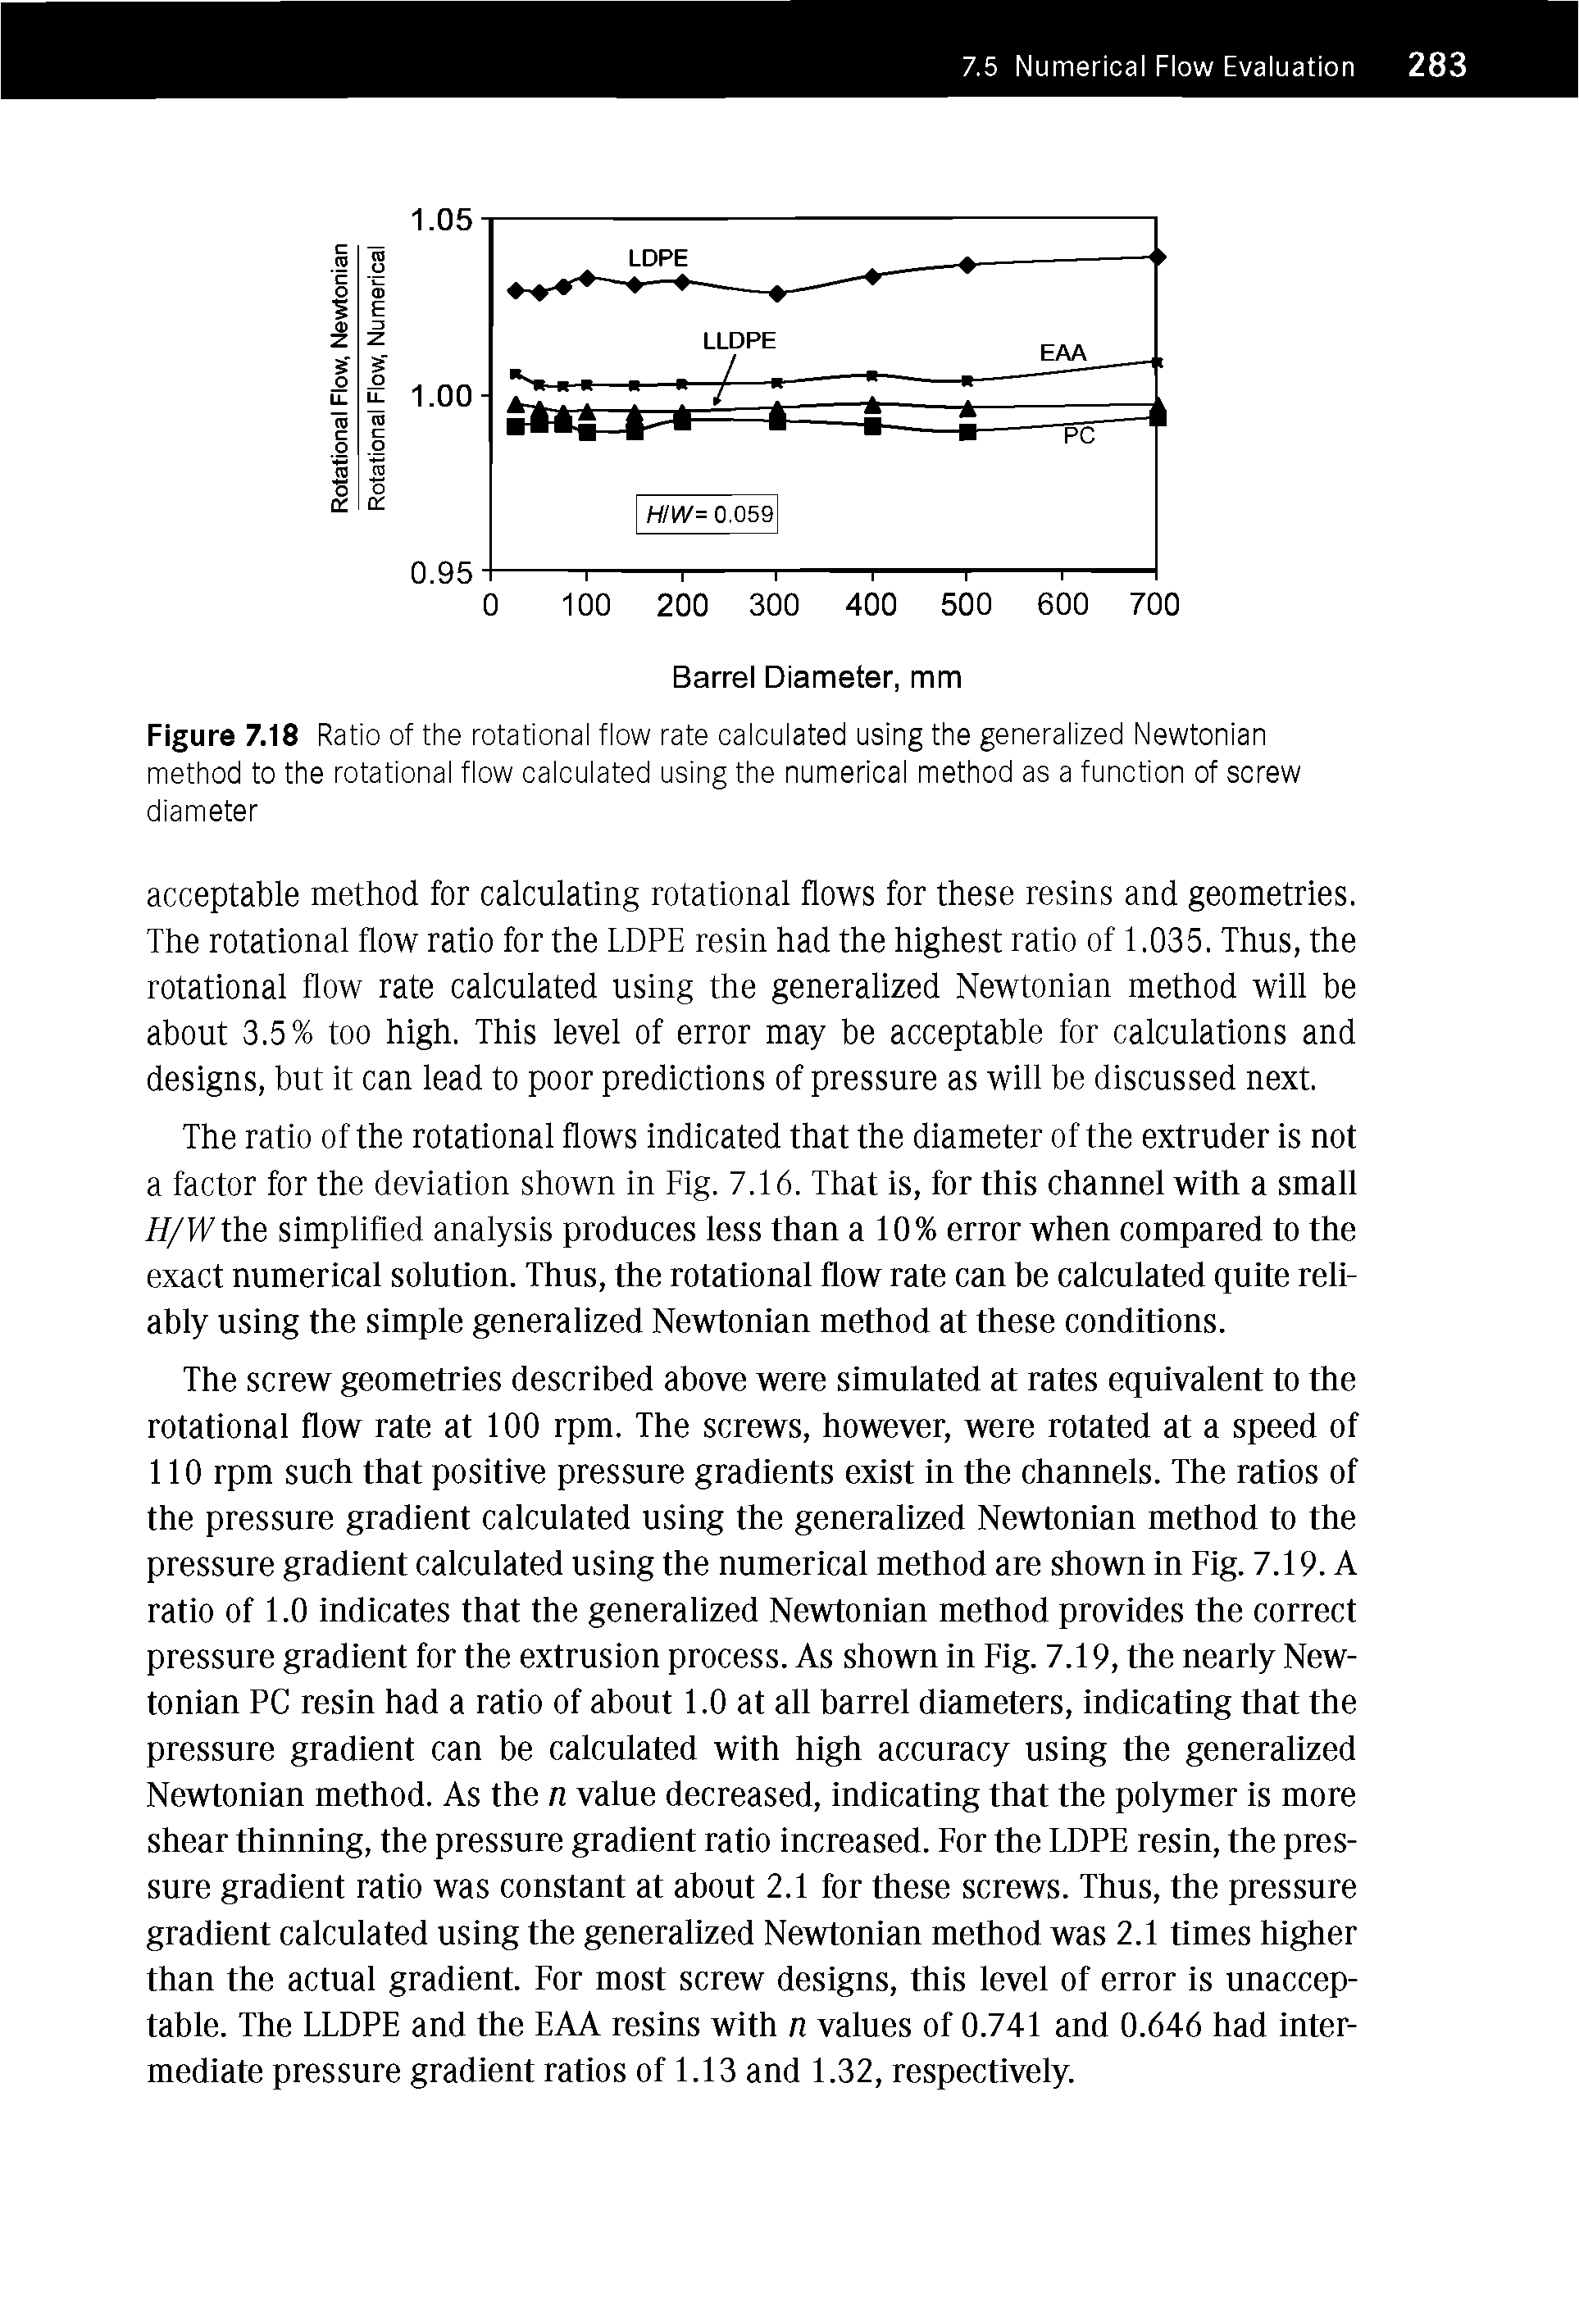 Figure 7.18 Ratio of the rotational flow rate calculated using the generalized Newtonian method to the rotational flow calculated using the numerical method as a function of screw diameter...